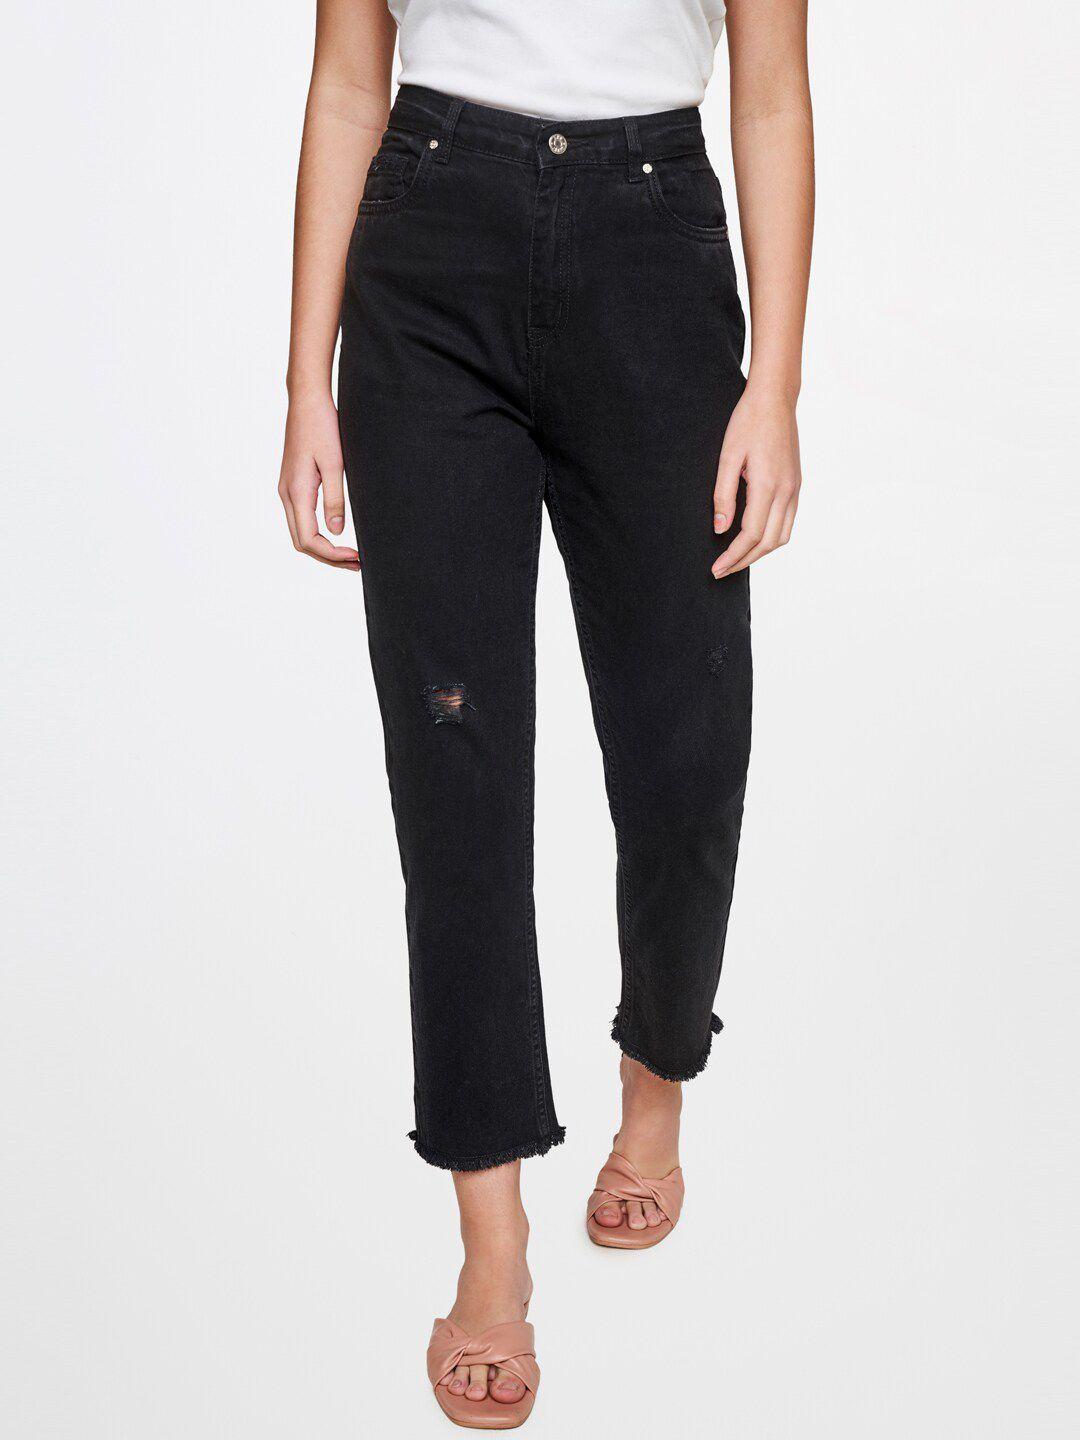 and-women-black-mom-fit-trousers